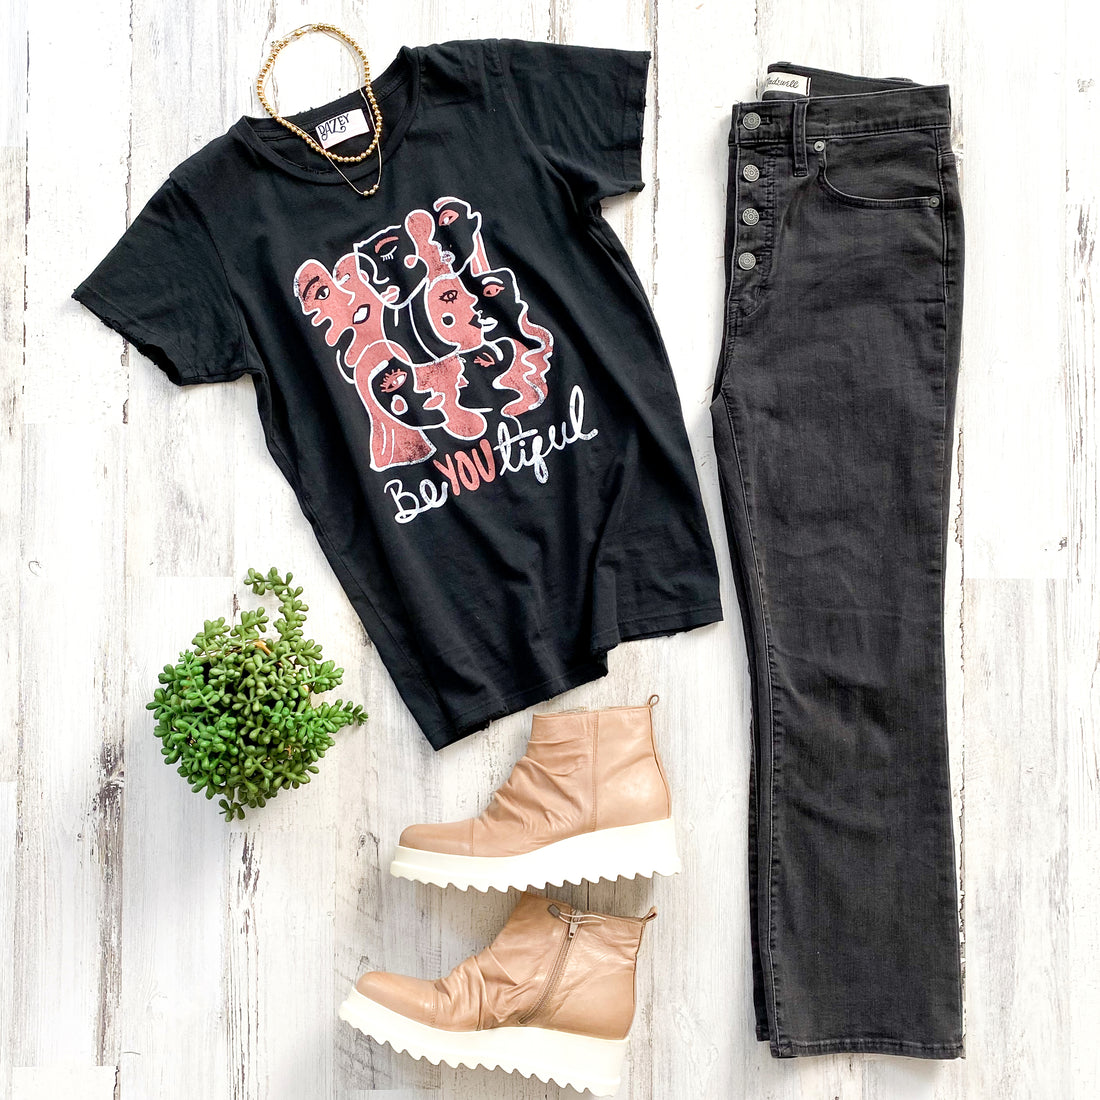 Shop The Look: Dazey LA + Madewell Jeans